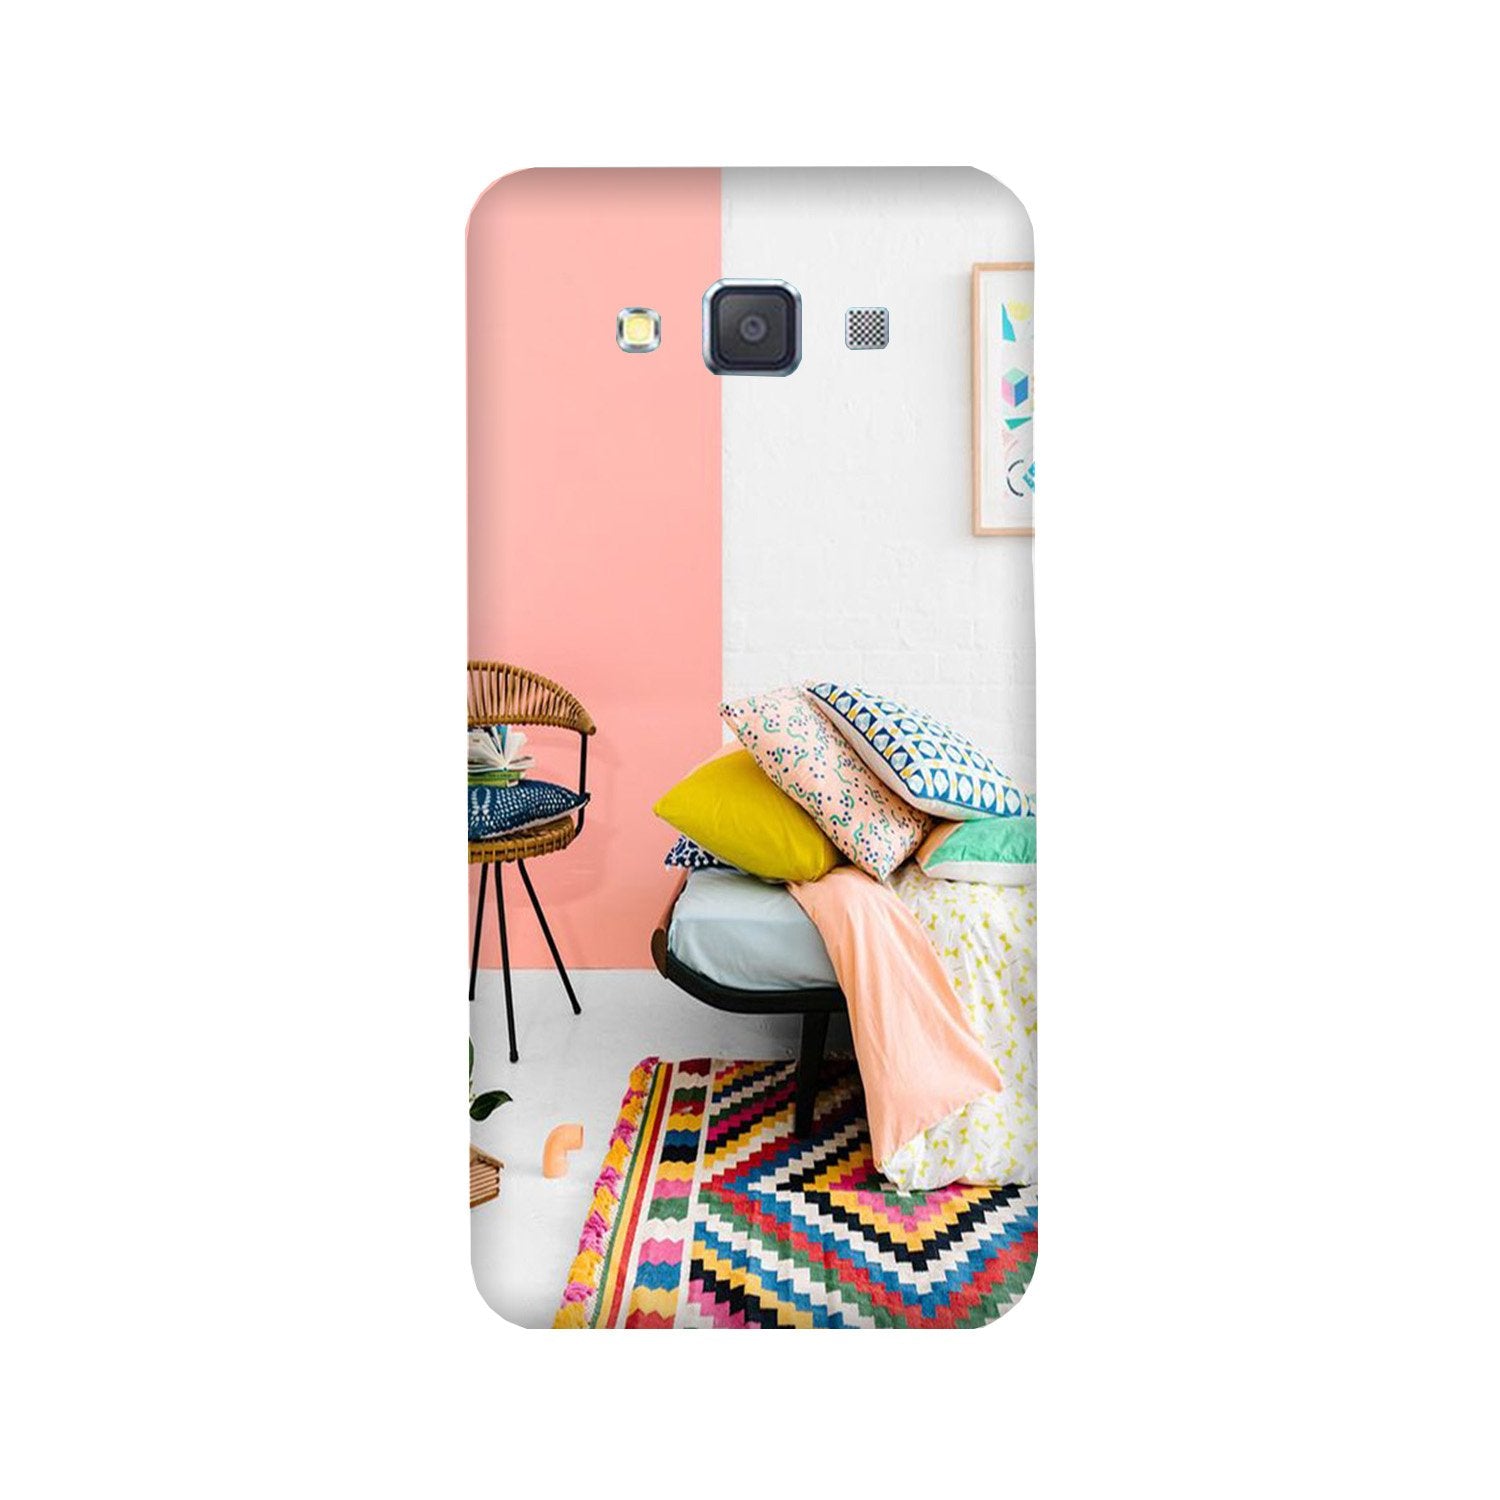 Home Décor Case for Galaxy ON7/ON7 Pro